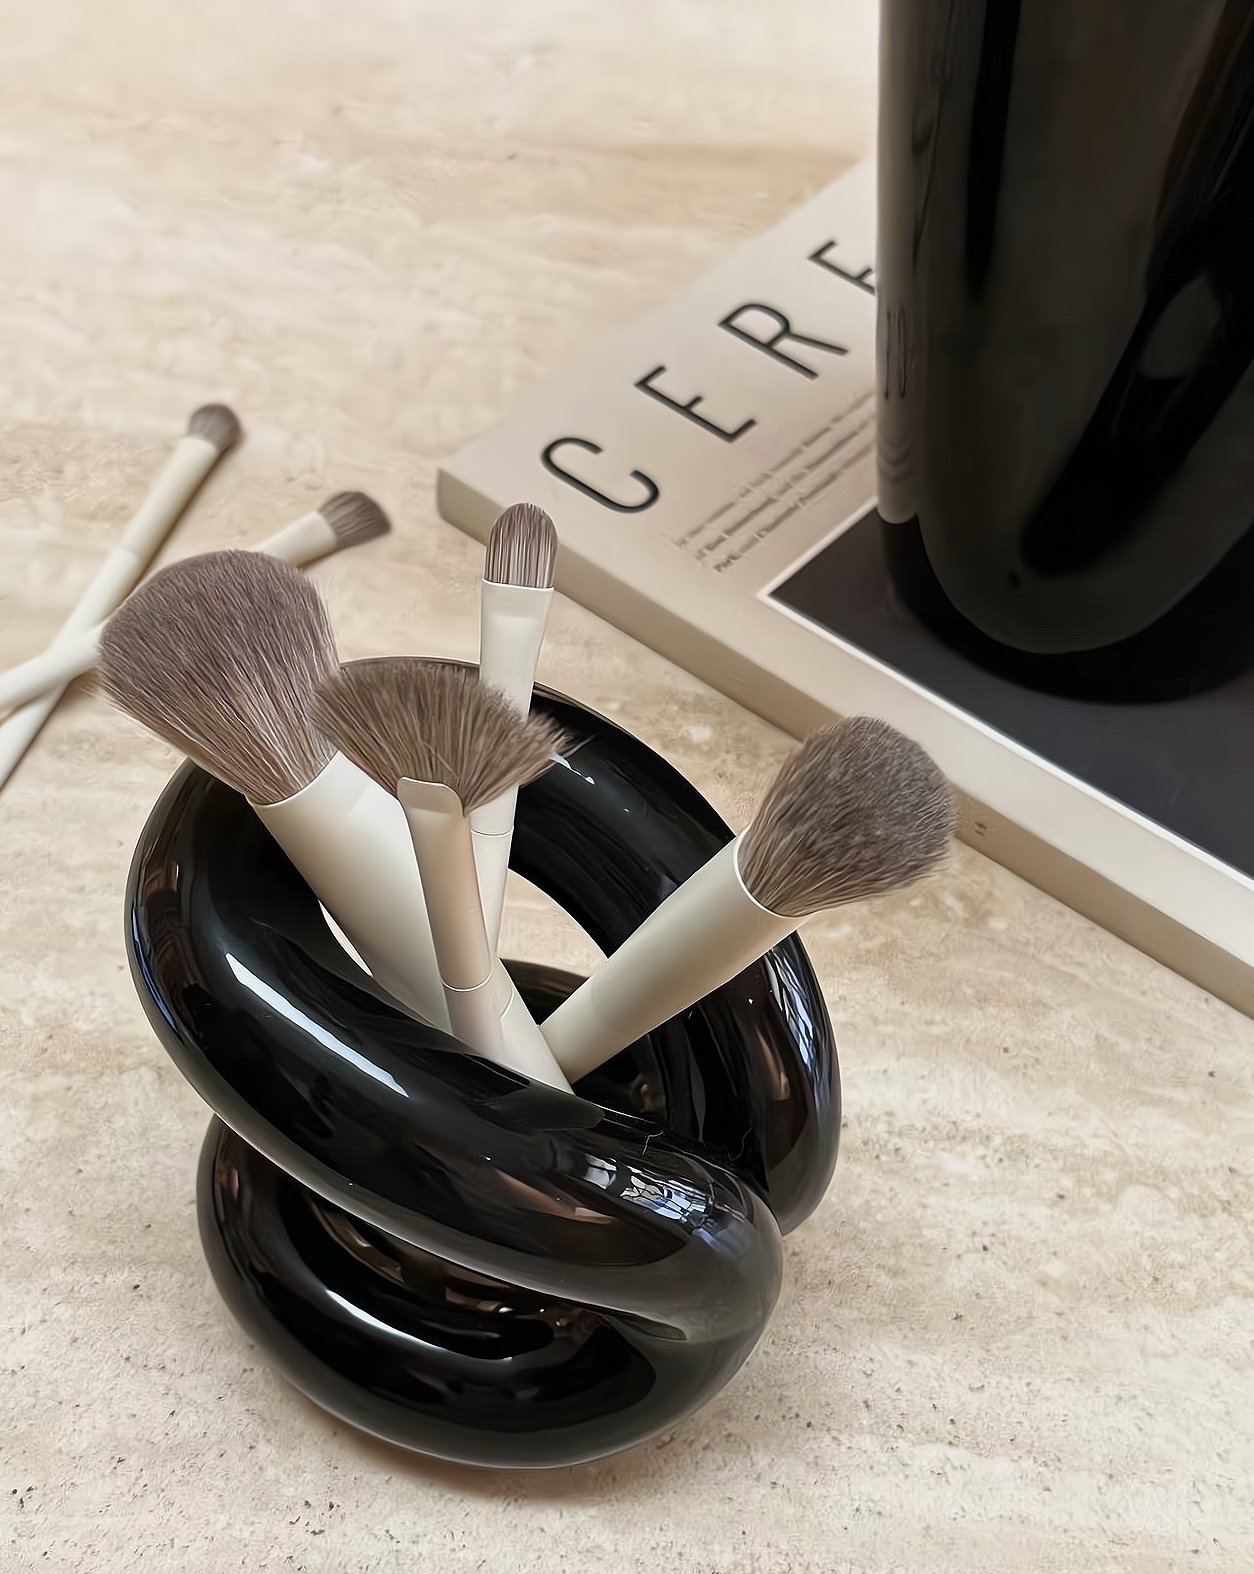 Nordic Style Ceramic Foundation Brushes Holders - Nordic Style Ceramic Foundation Brushes Holders - Black - INSPECIAL HOME